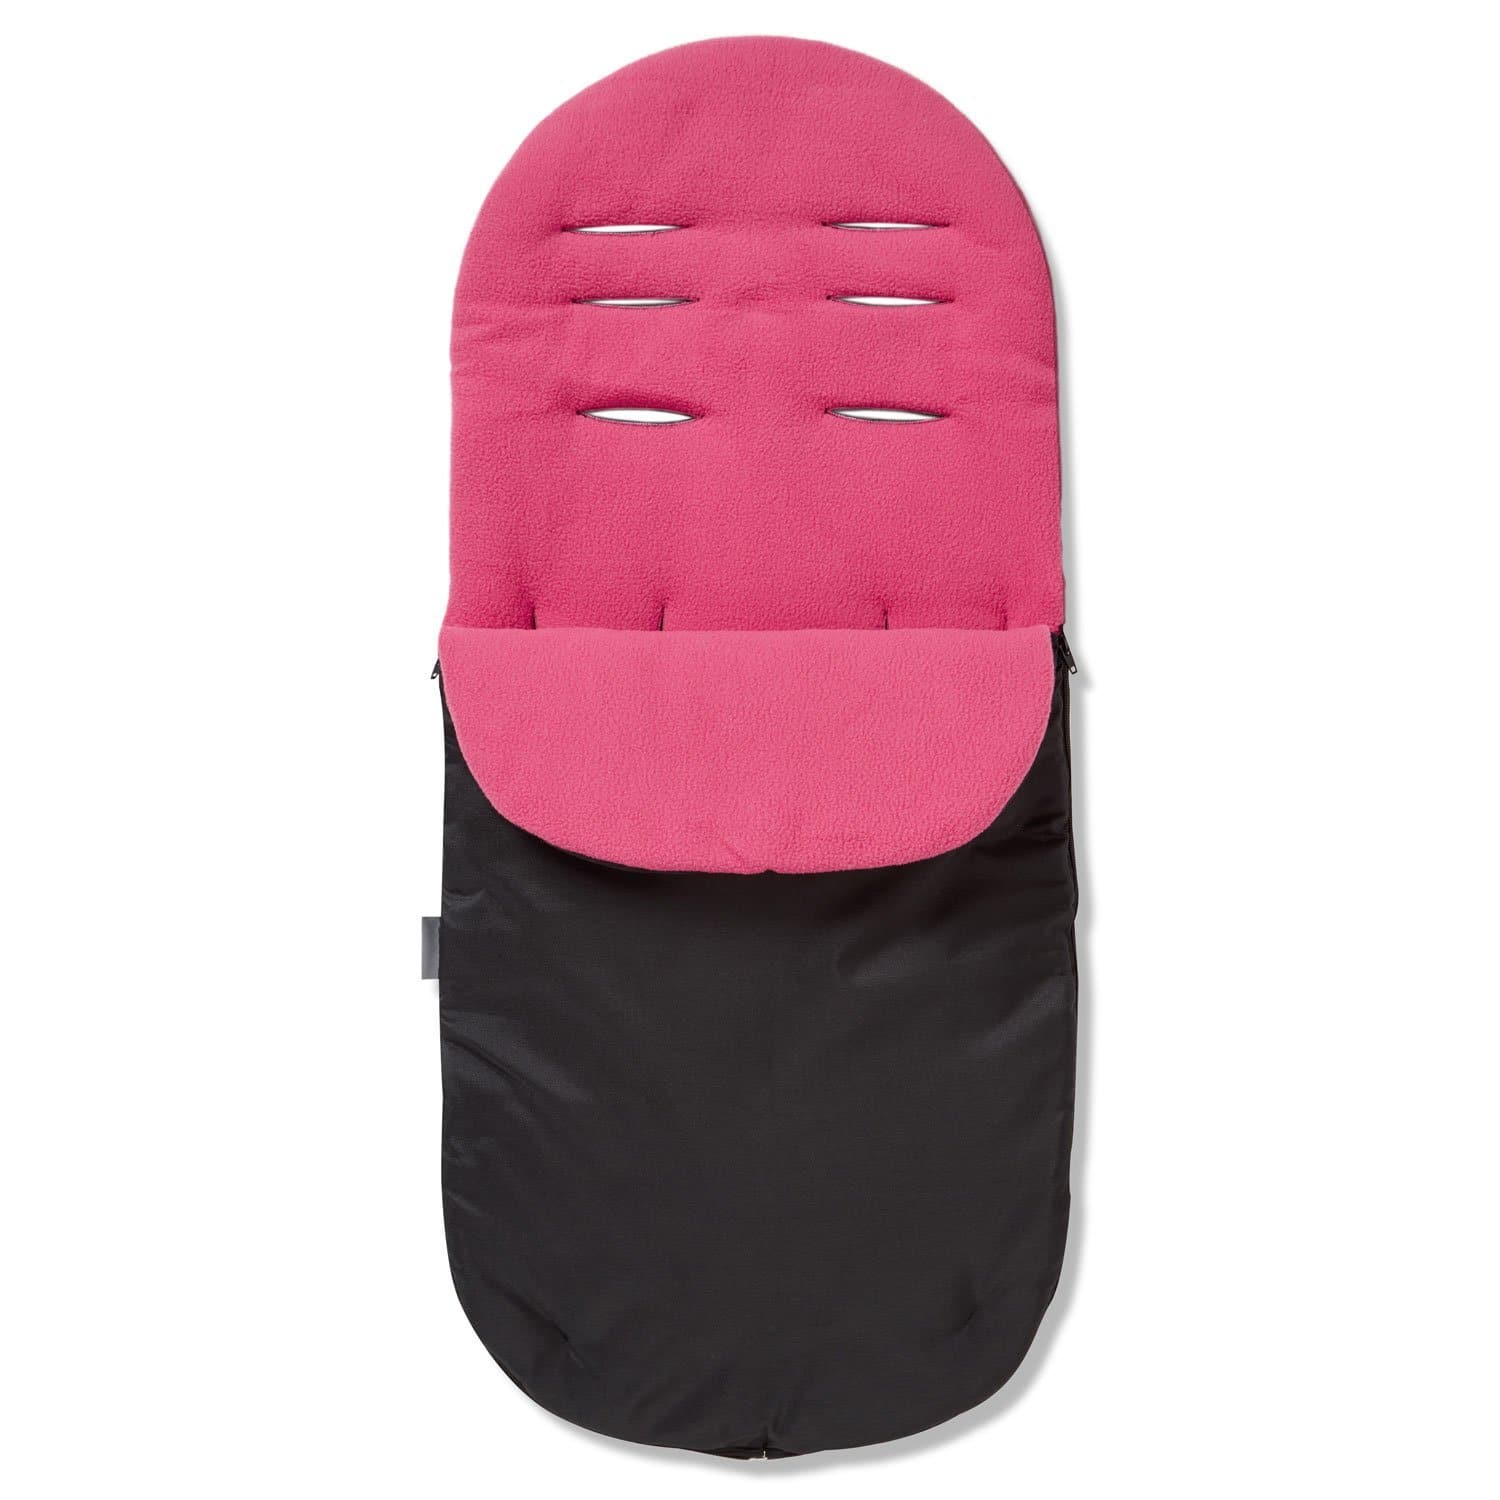 Footmuff / Cosy Toes Compatible with Firstwheels - Dark Pink / Fits All Models | For Your Little One